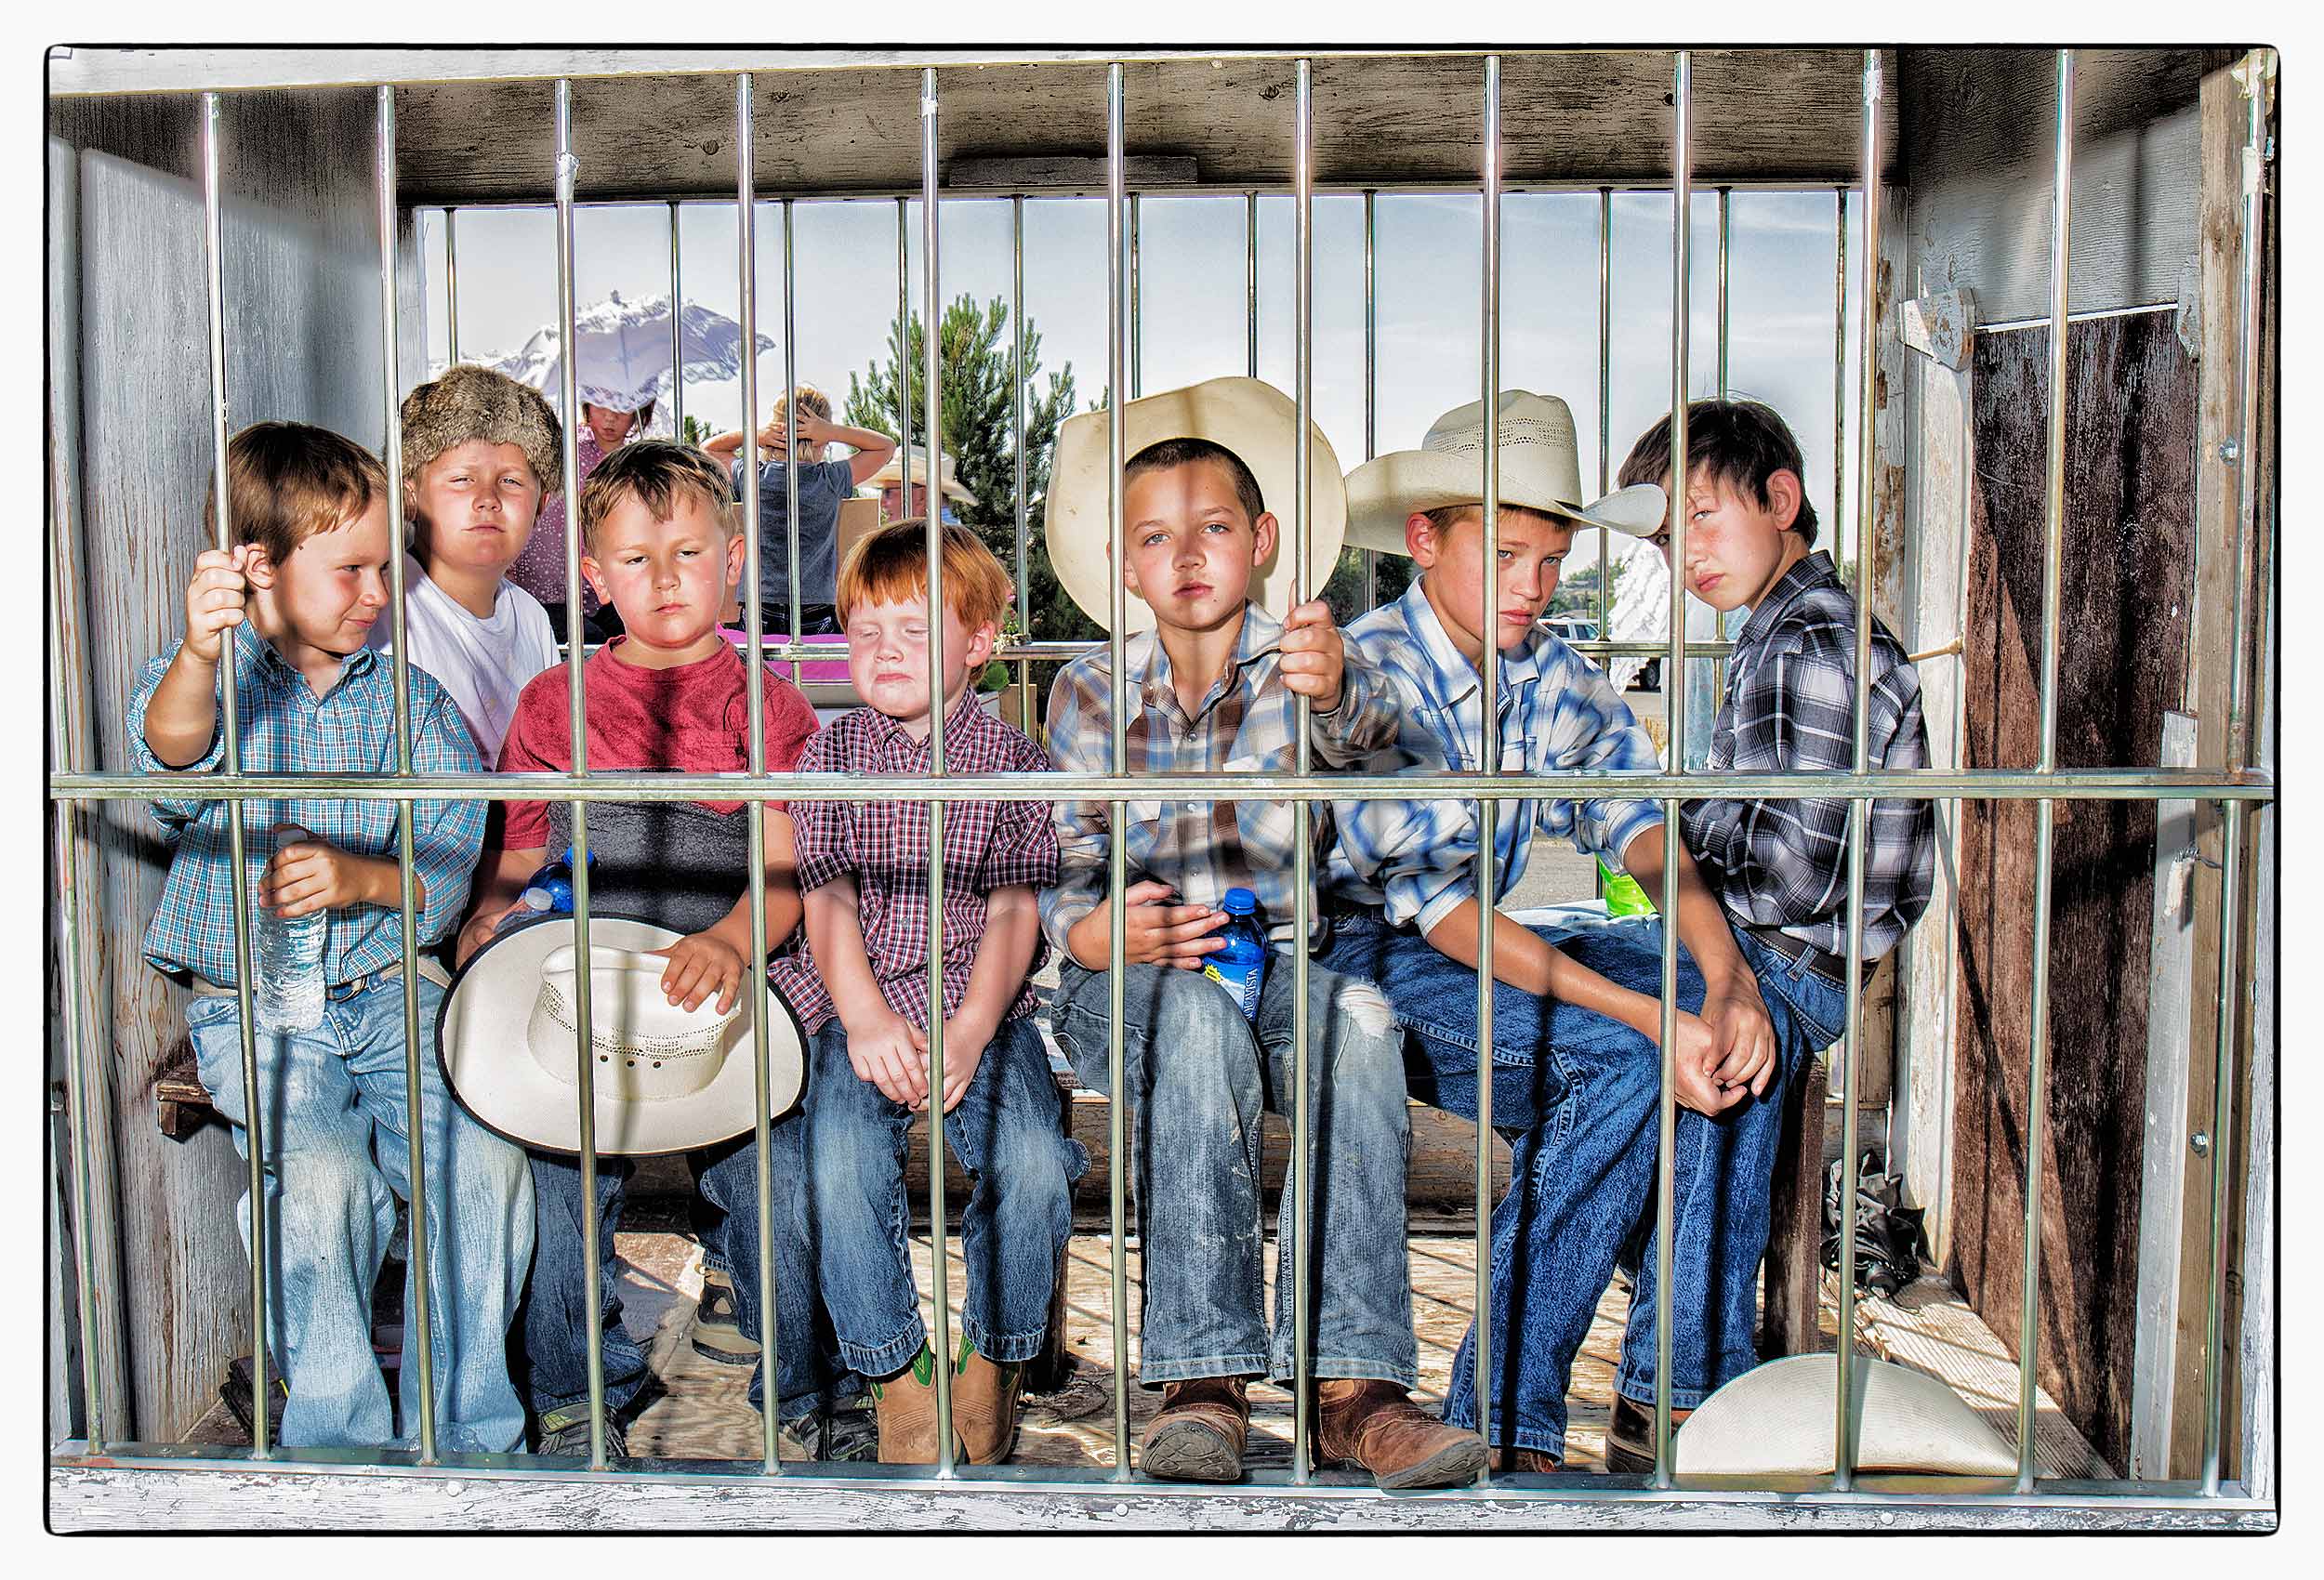 a-group-of-children-are-unhappy-as-they-are-held-in-a-mock-prison-on-a-float-during-the-fourth-of-july-celebrations-in-cody-wyoming